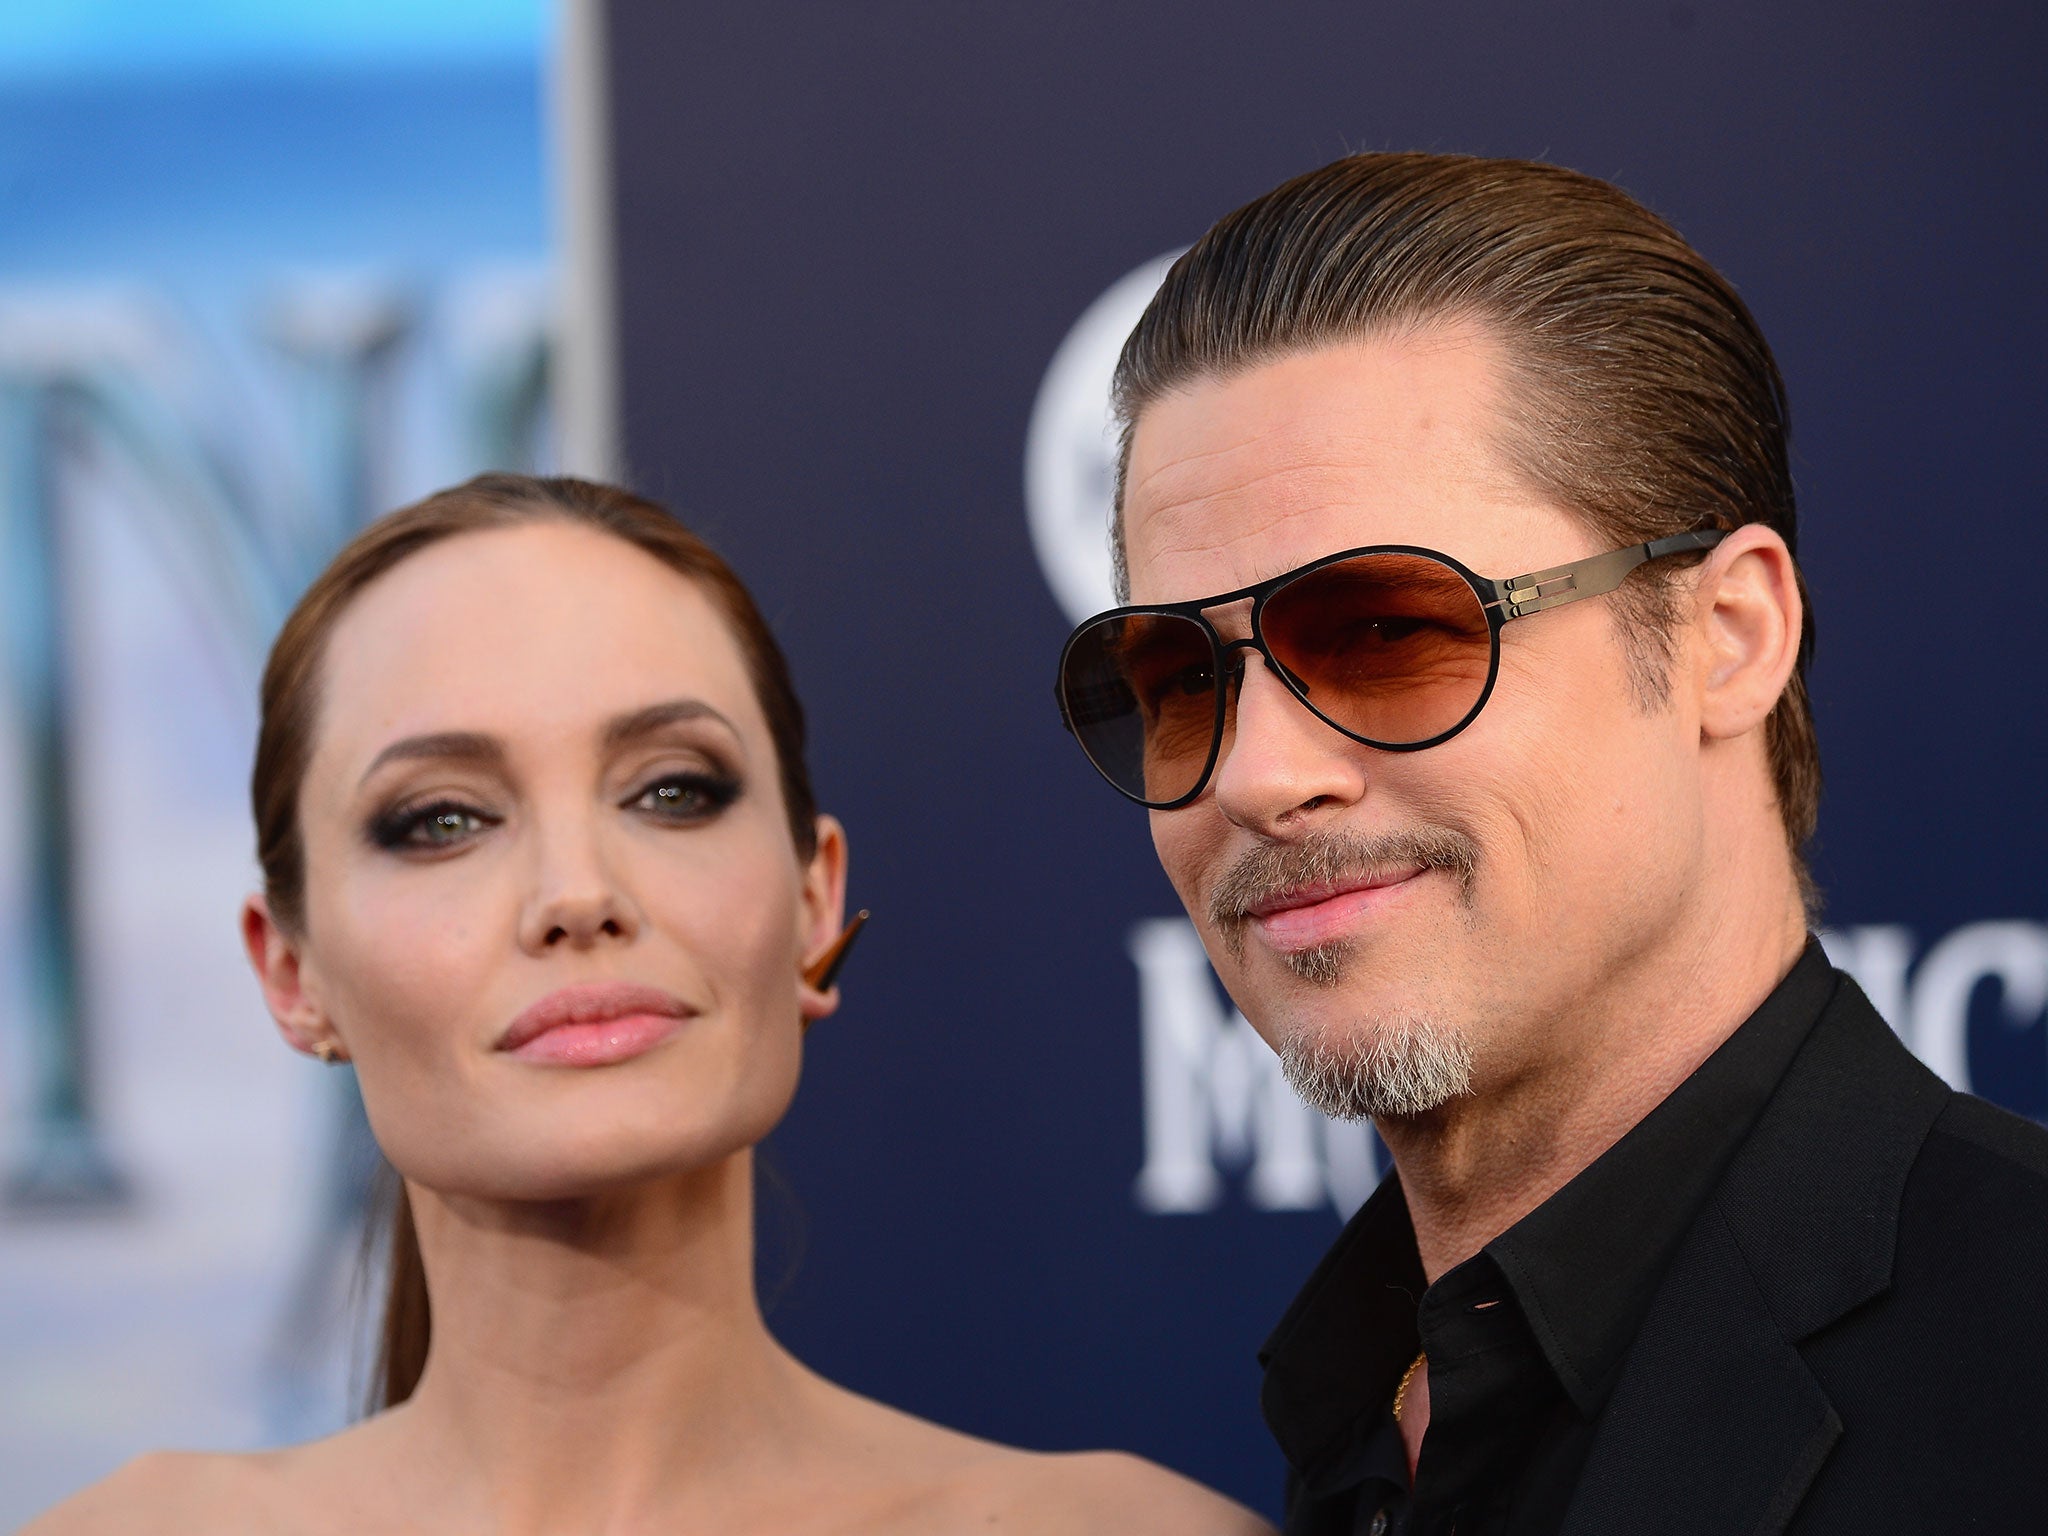 Angelina Jolie and Brad Pitt discuss his support for her decision